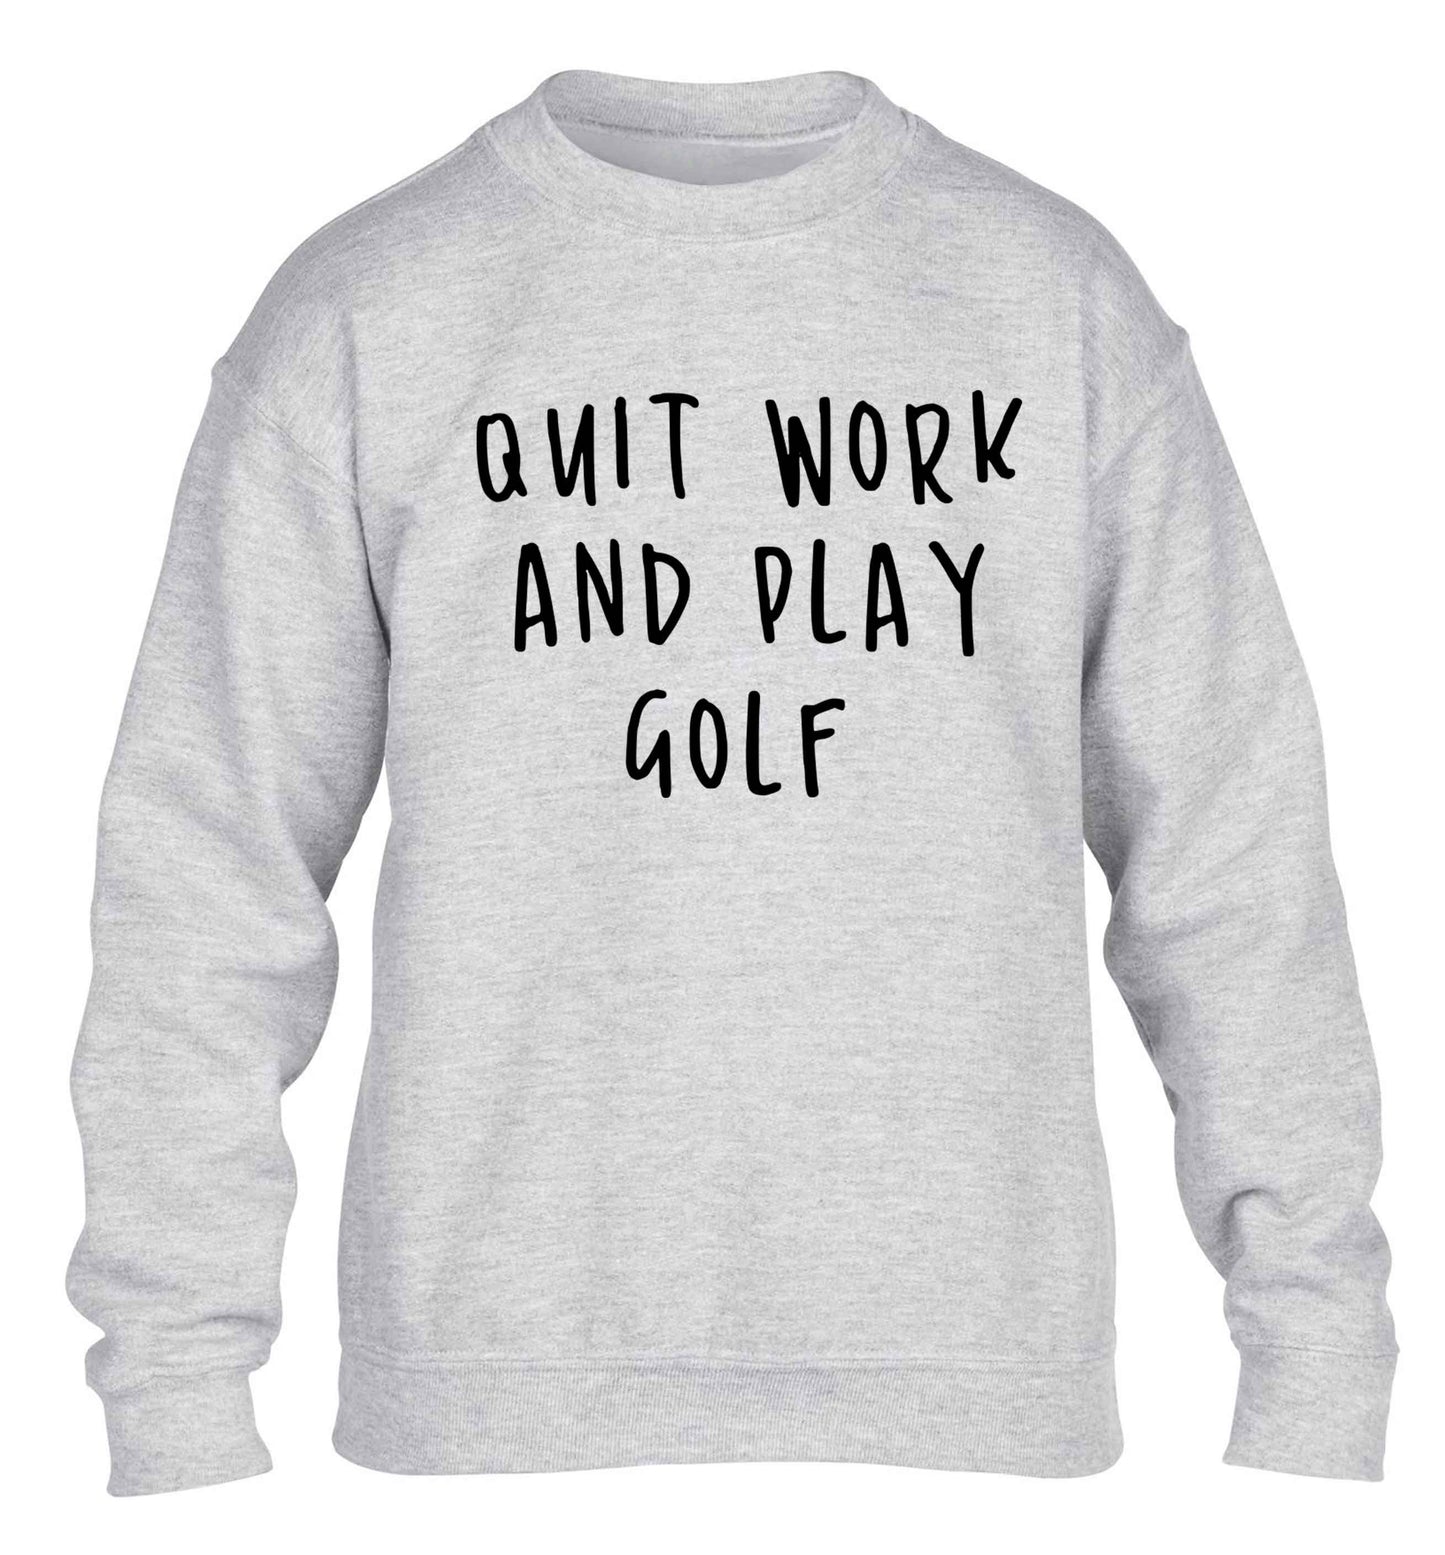 Quit work and play golf children's grey sweater 12-13 Years